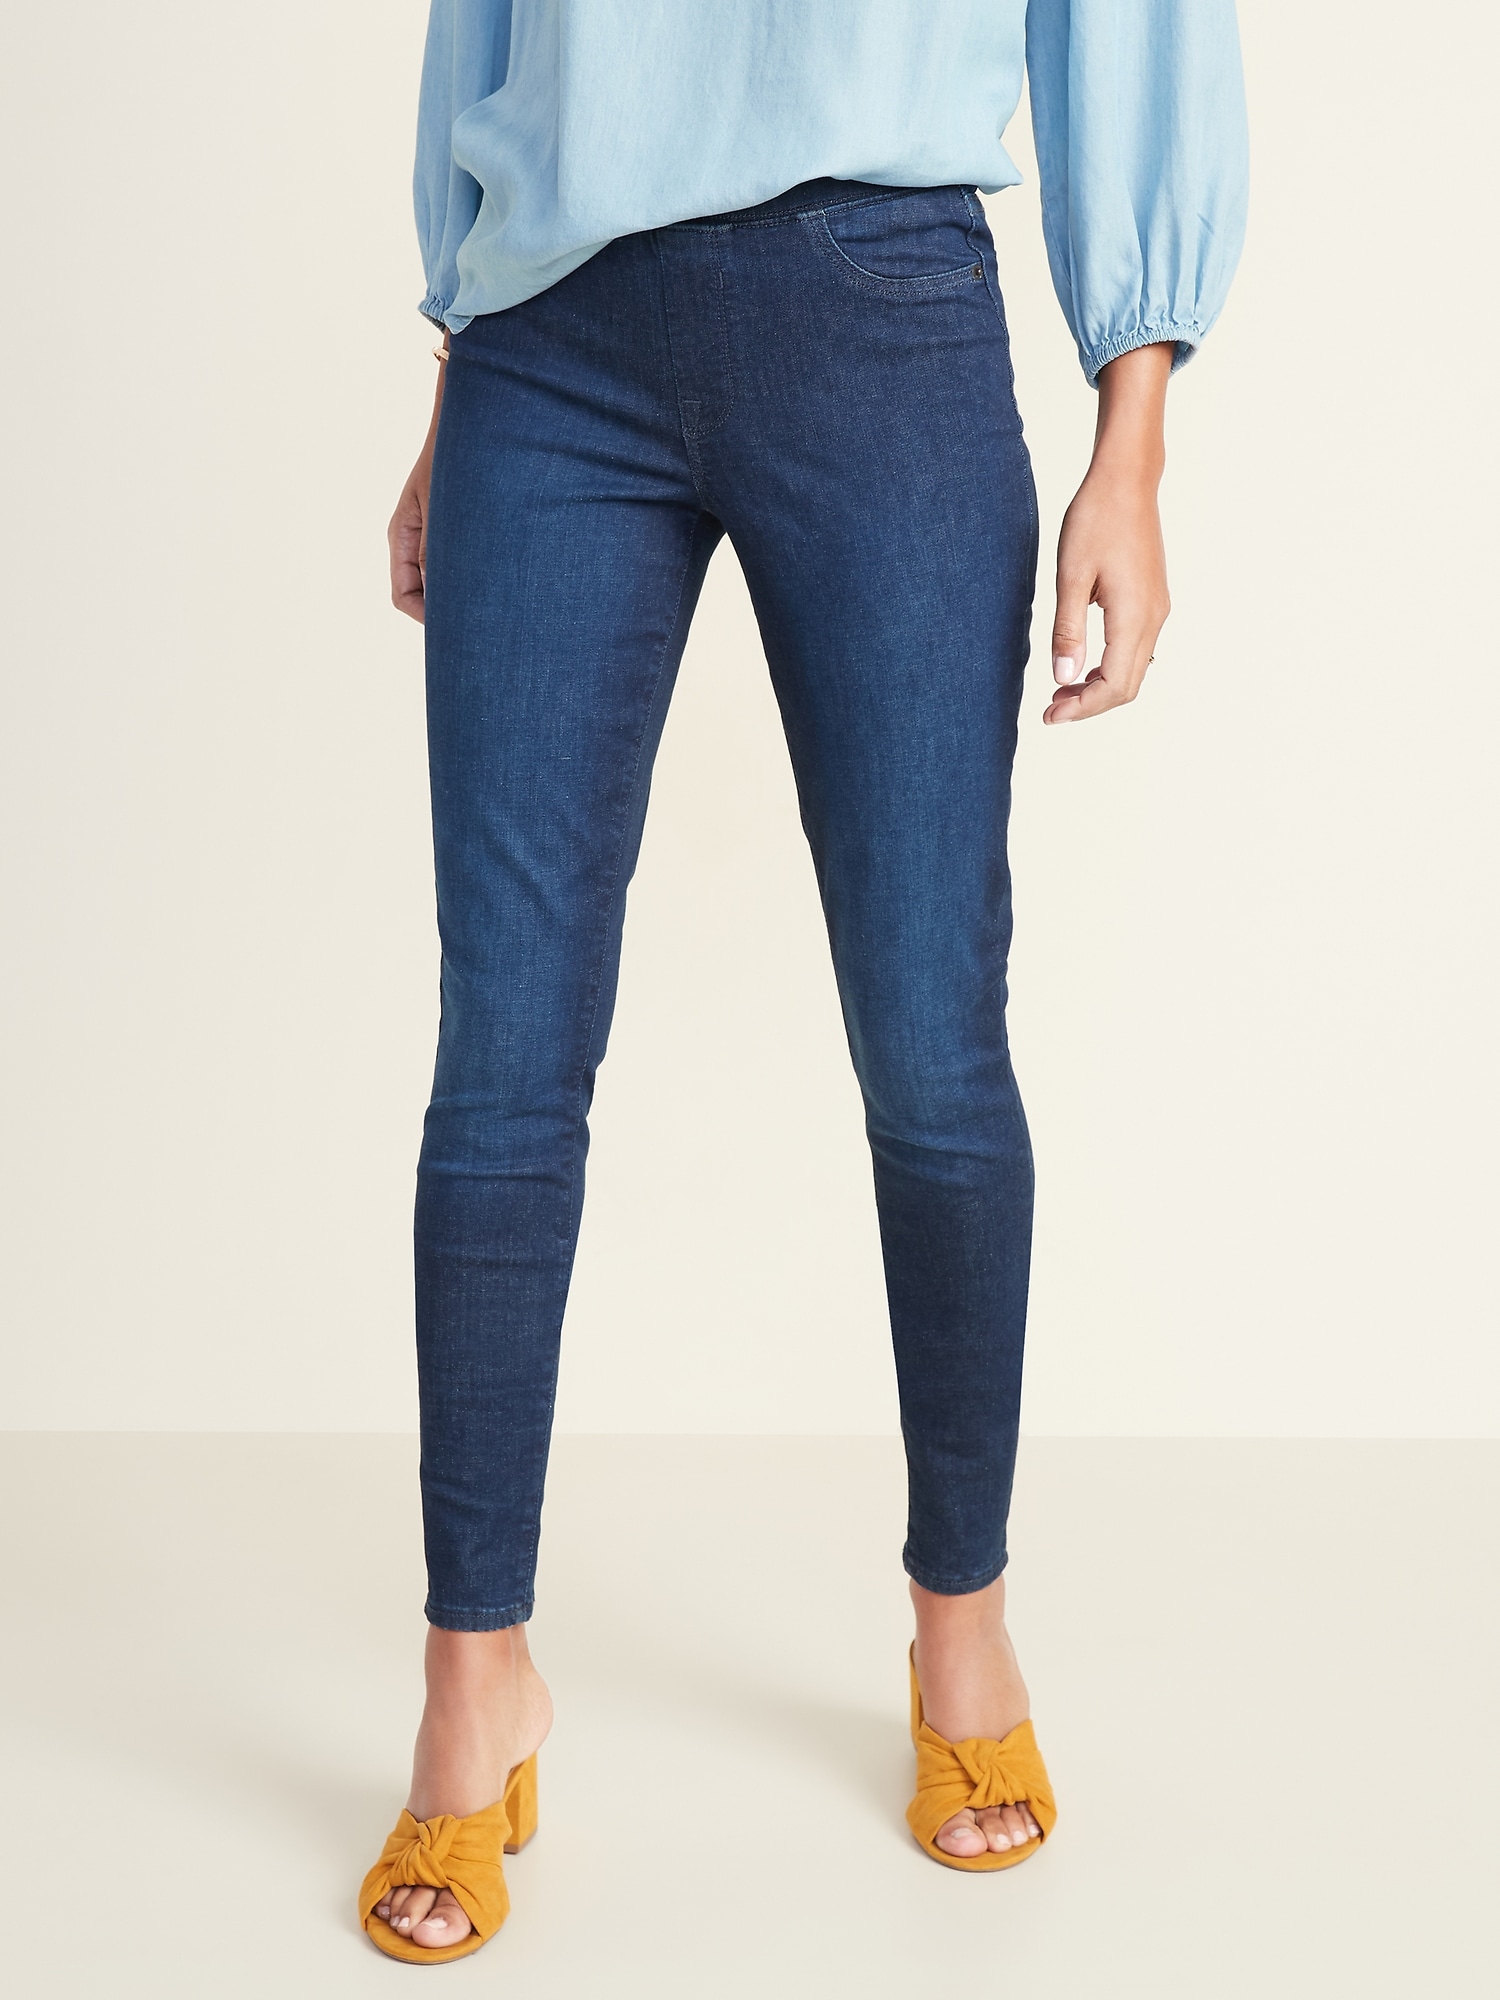 old navy rockstar jeans mid rise